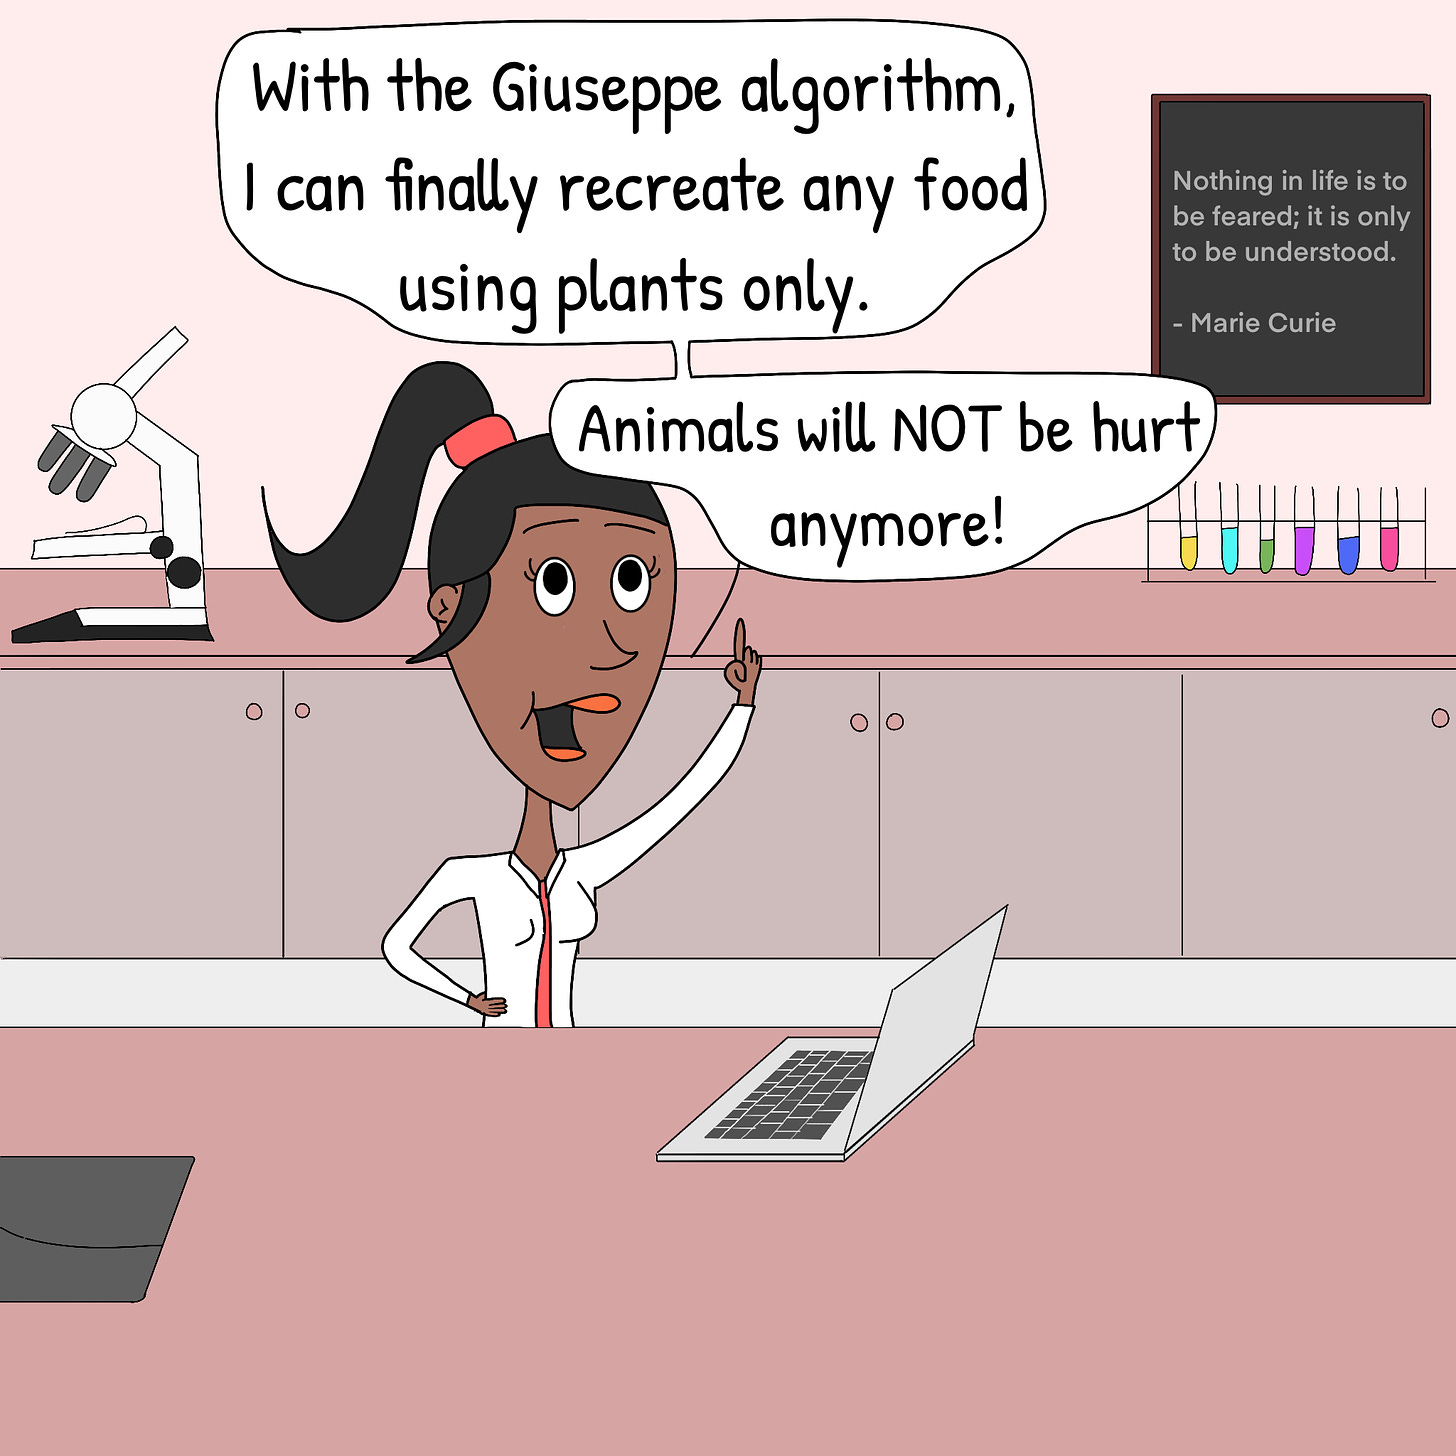 Panel 1: Tori is in her lab. She's excited to test her new Giuseppe algorithm. "With the Giuseppe algorithm, I can finally recreate any food using plants only. Animals will NOT be hurt anymore!", she says.